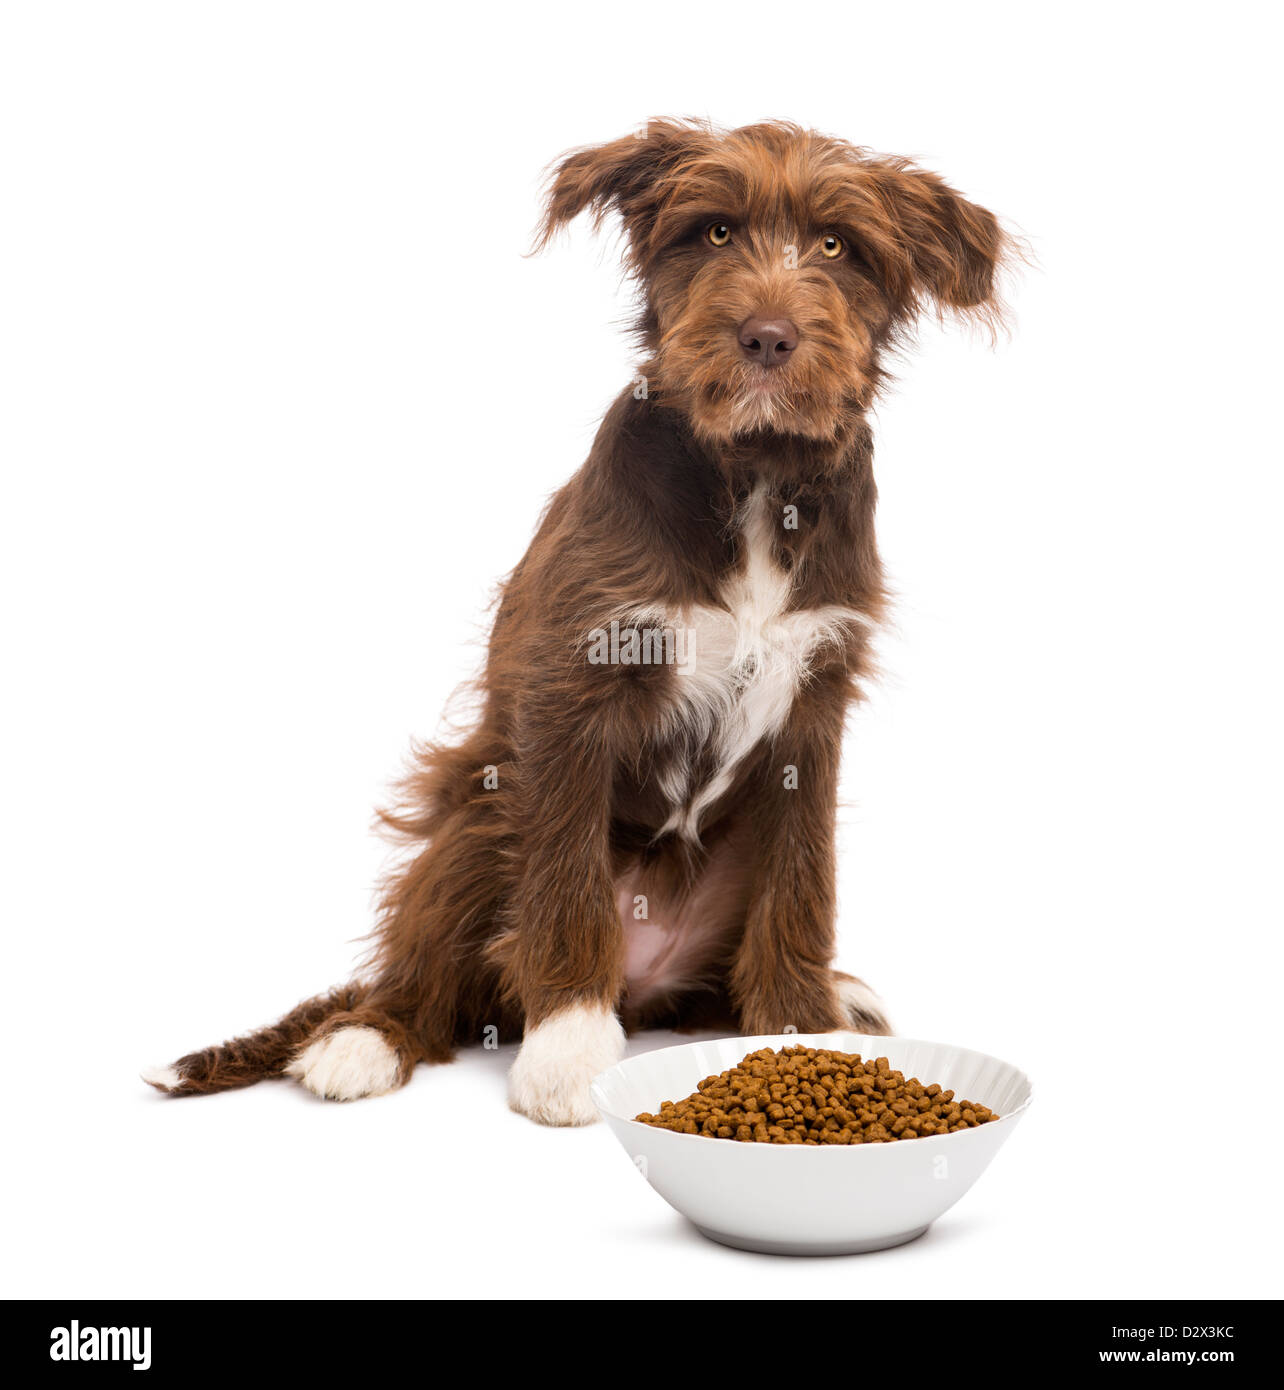 Crossbreed, 5 months old, sitting next to bowl of dog food against white background Stock Photo